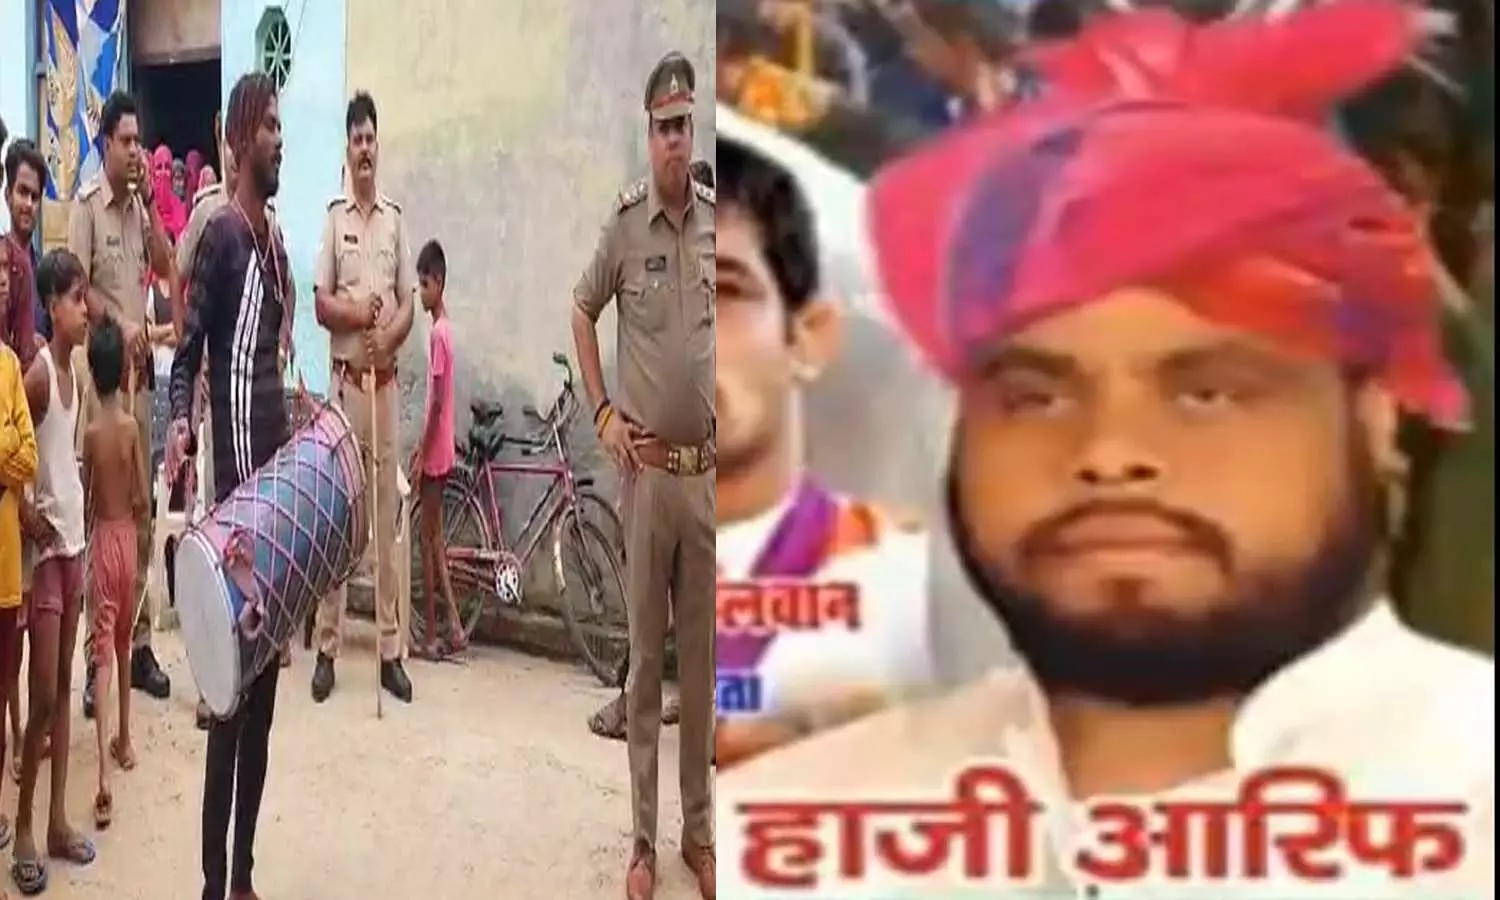 Action against cow smuggler mafia in Bulandshahr, police confiscated property worth Rs 2 crore 5 lakh